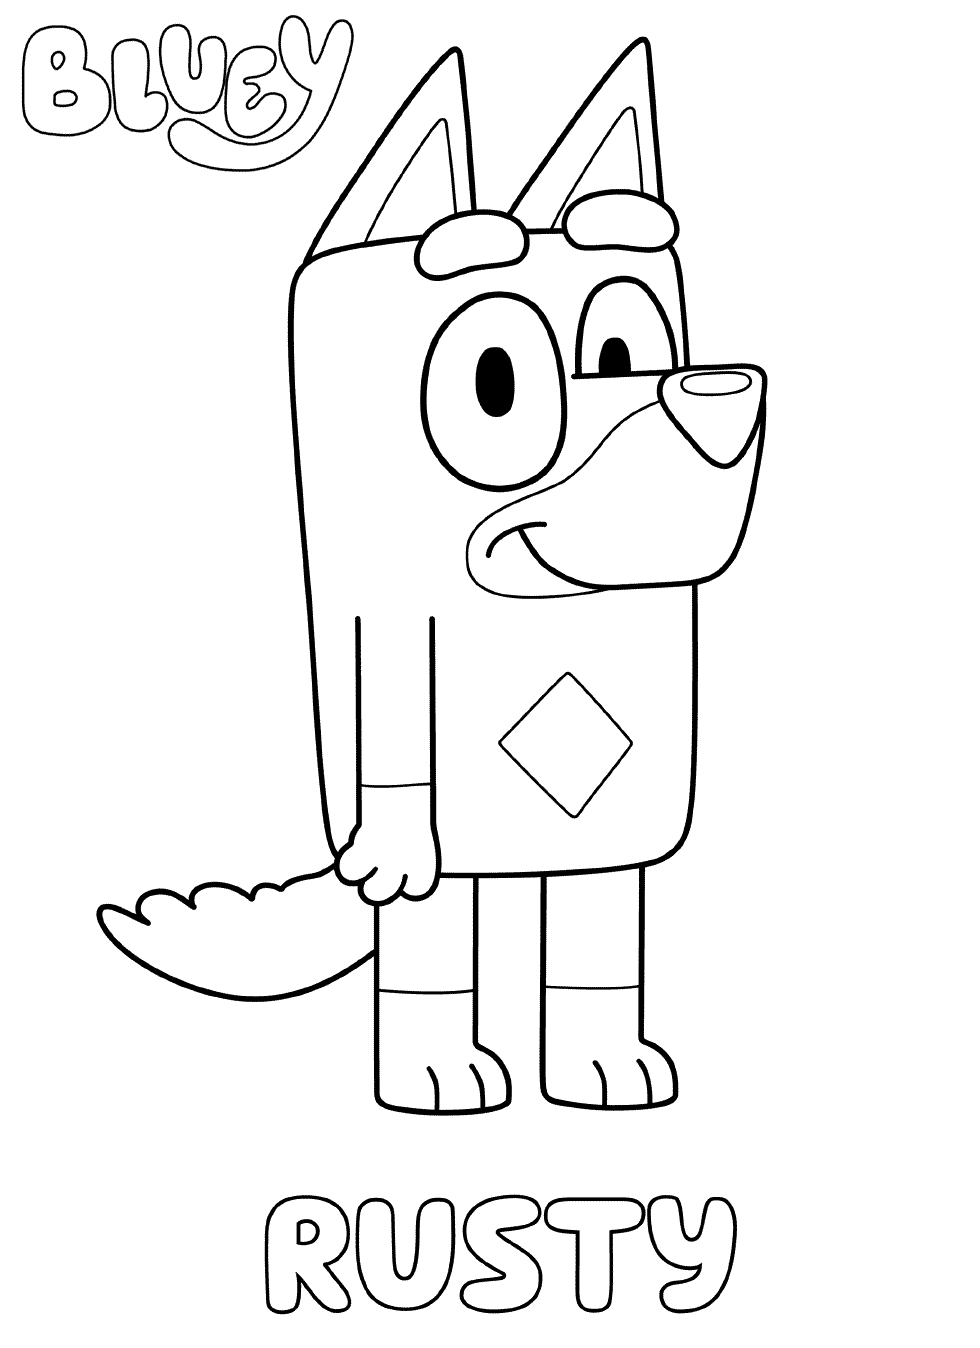 Rusty Blueys Coloring Pages   Coloring Cool